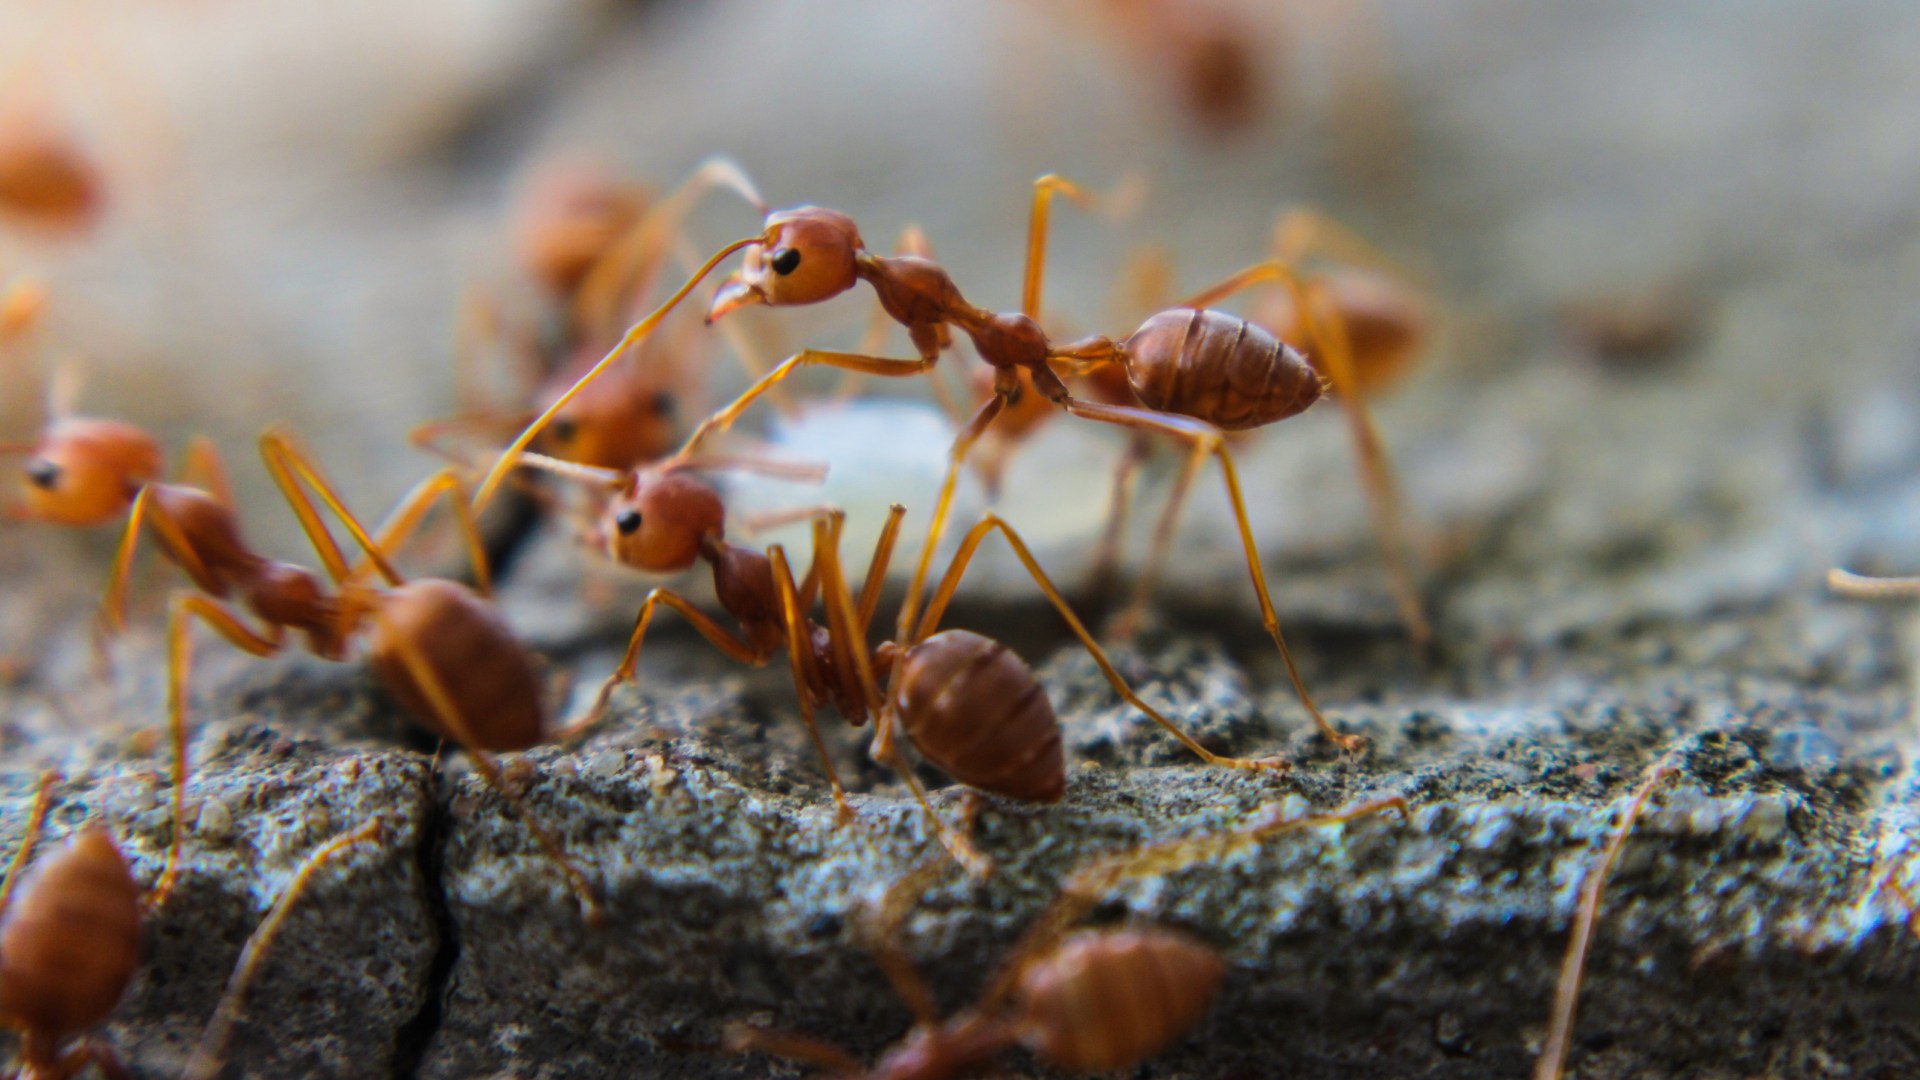 Dealing With Fire Ants Can Be Difficult & Dangerous - Always Hire Pros!